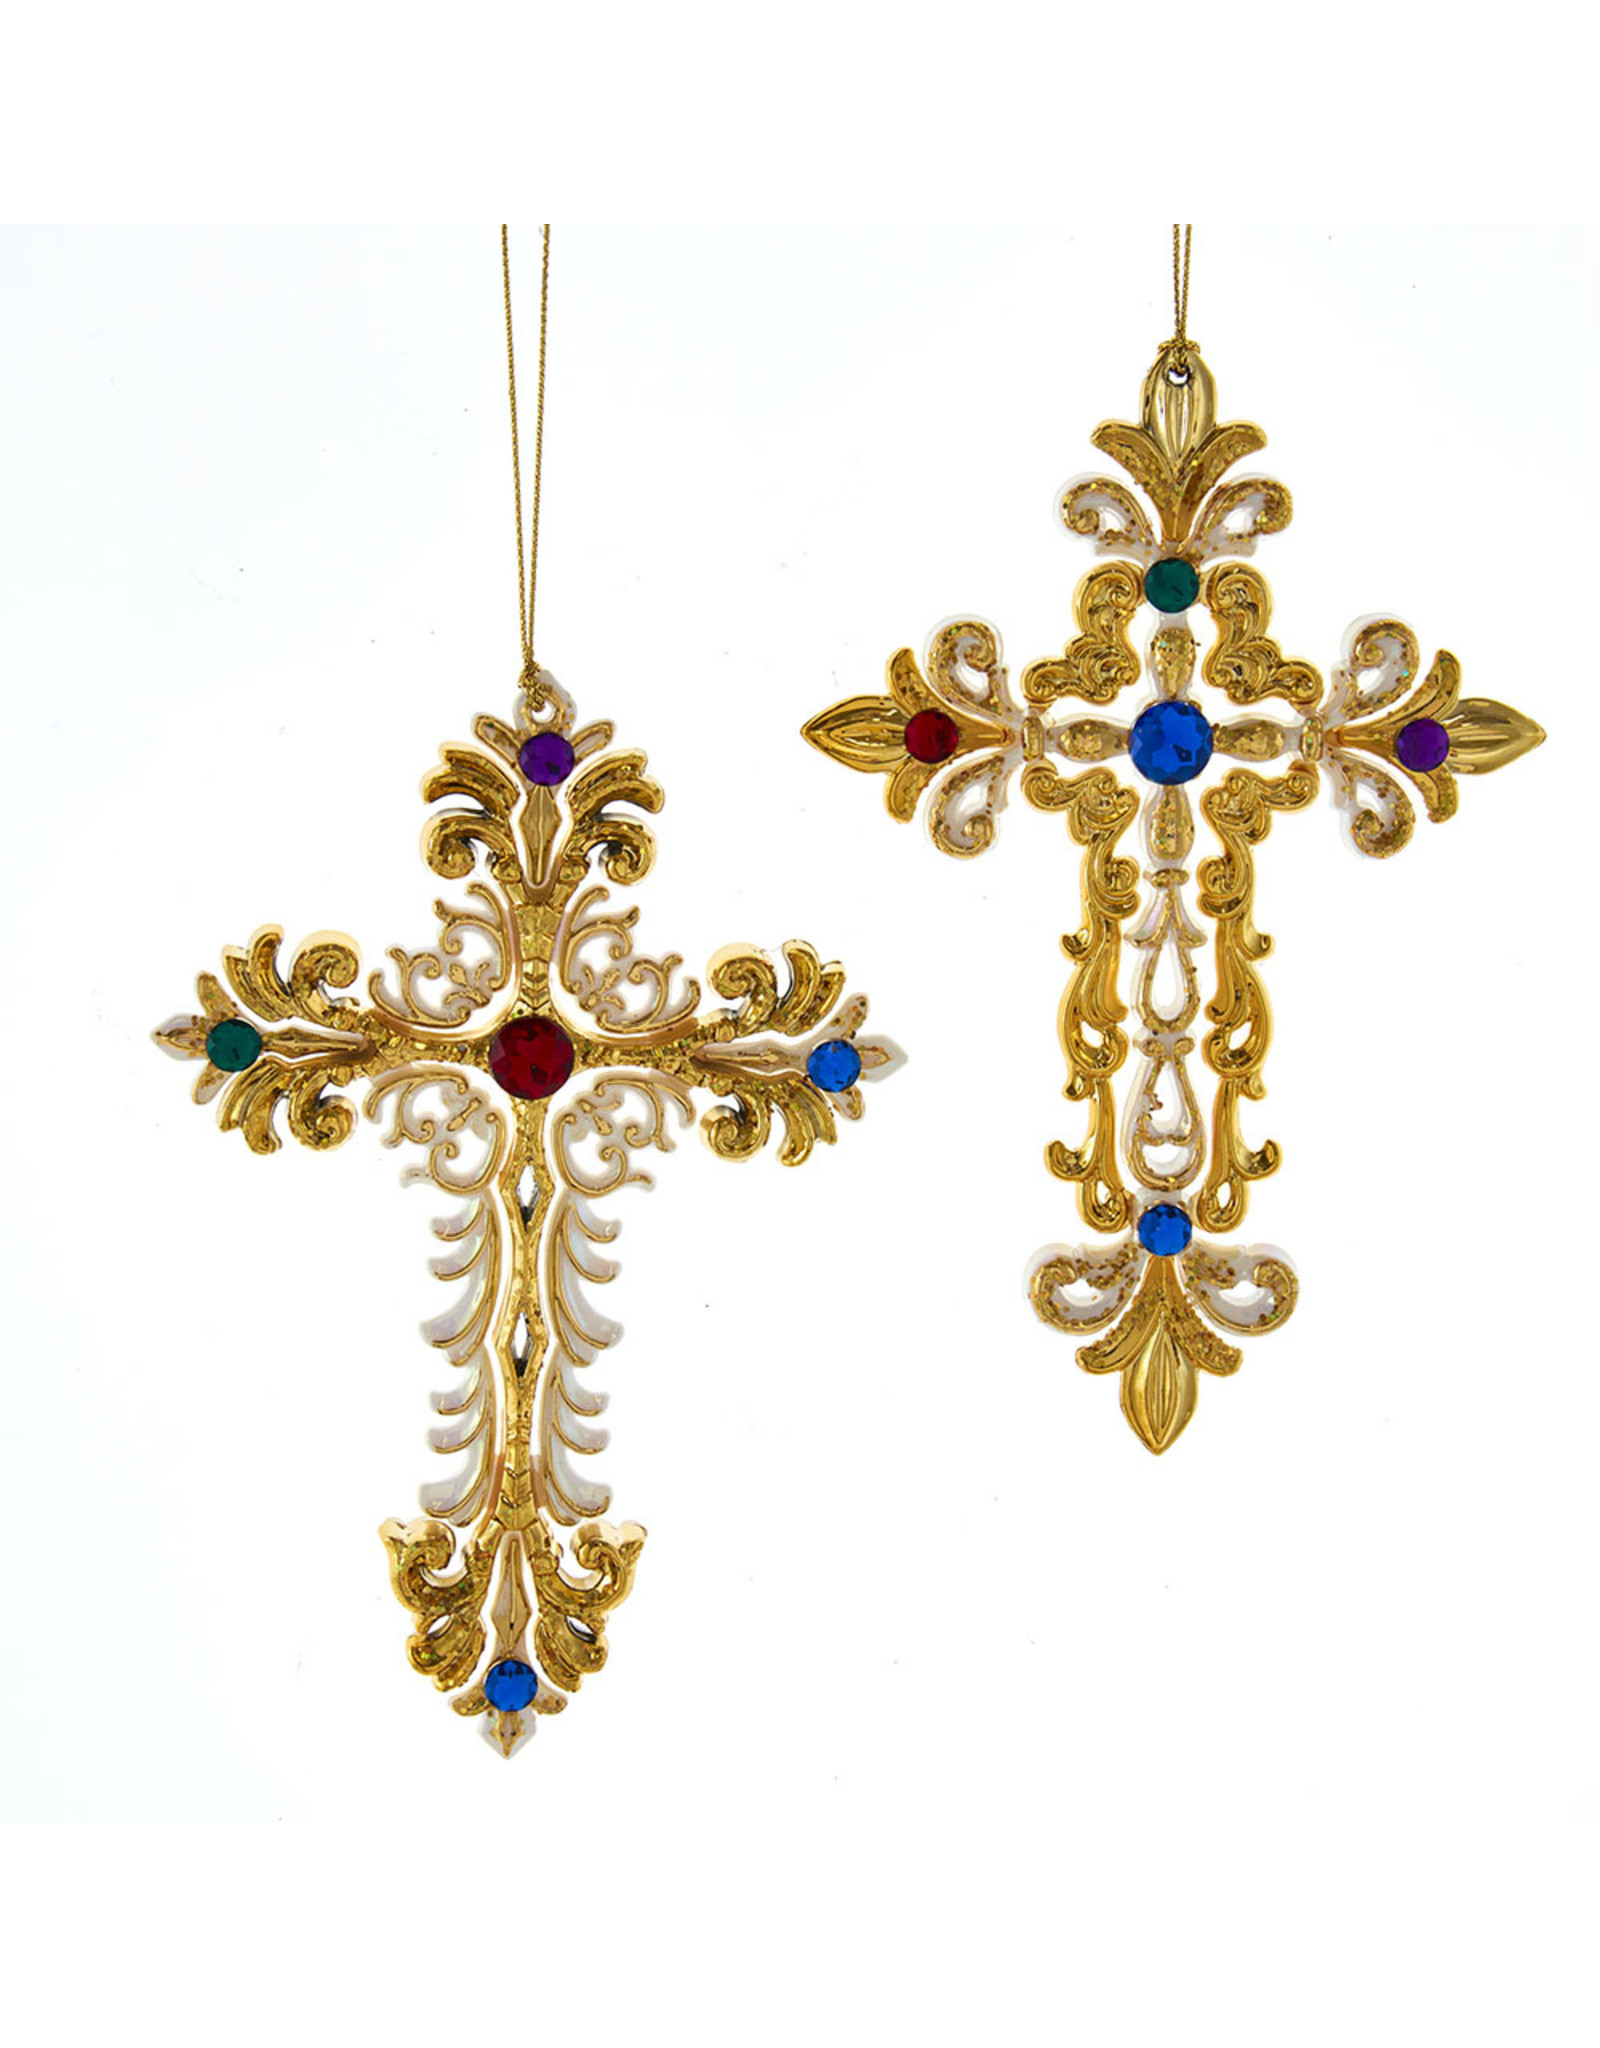 Kurt Adler White And Gold Jeweled Cross Christmas Ornaments 2 Assorted